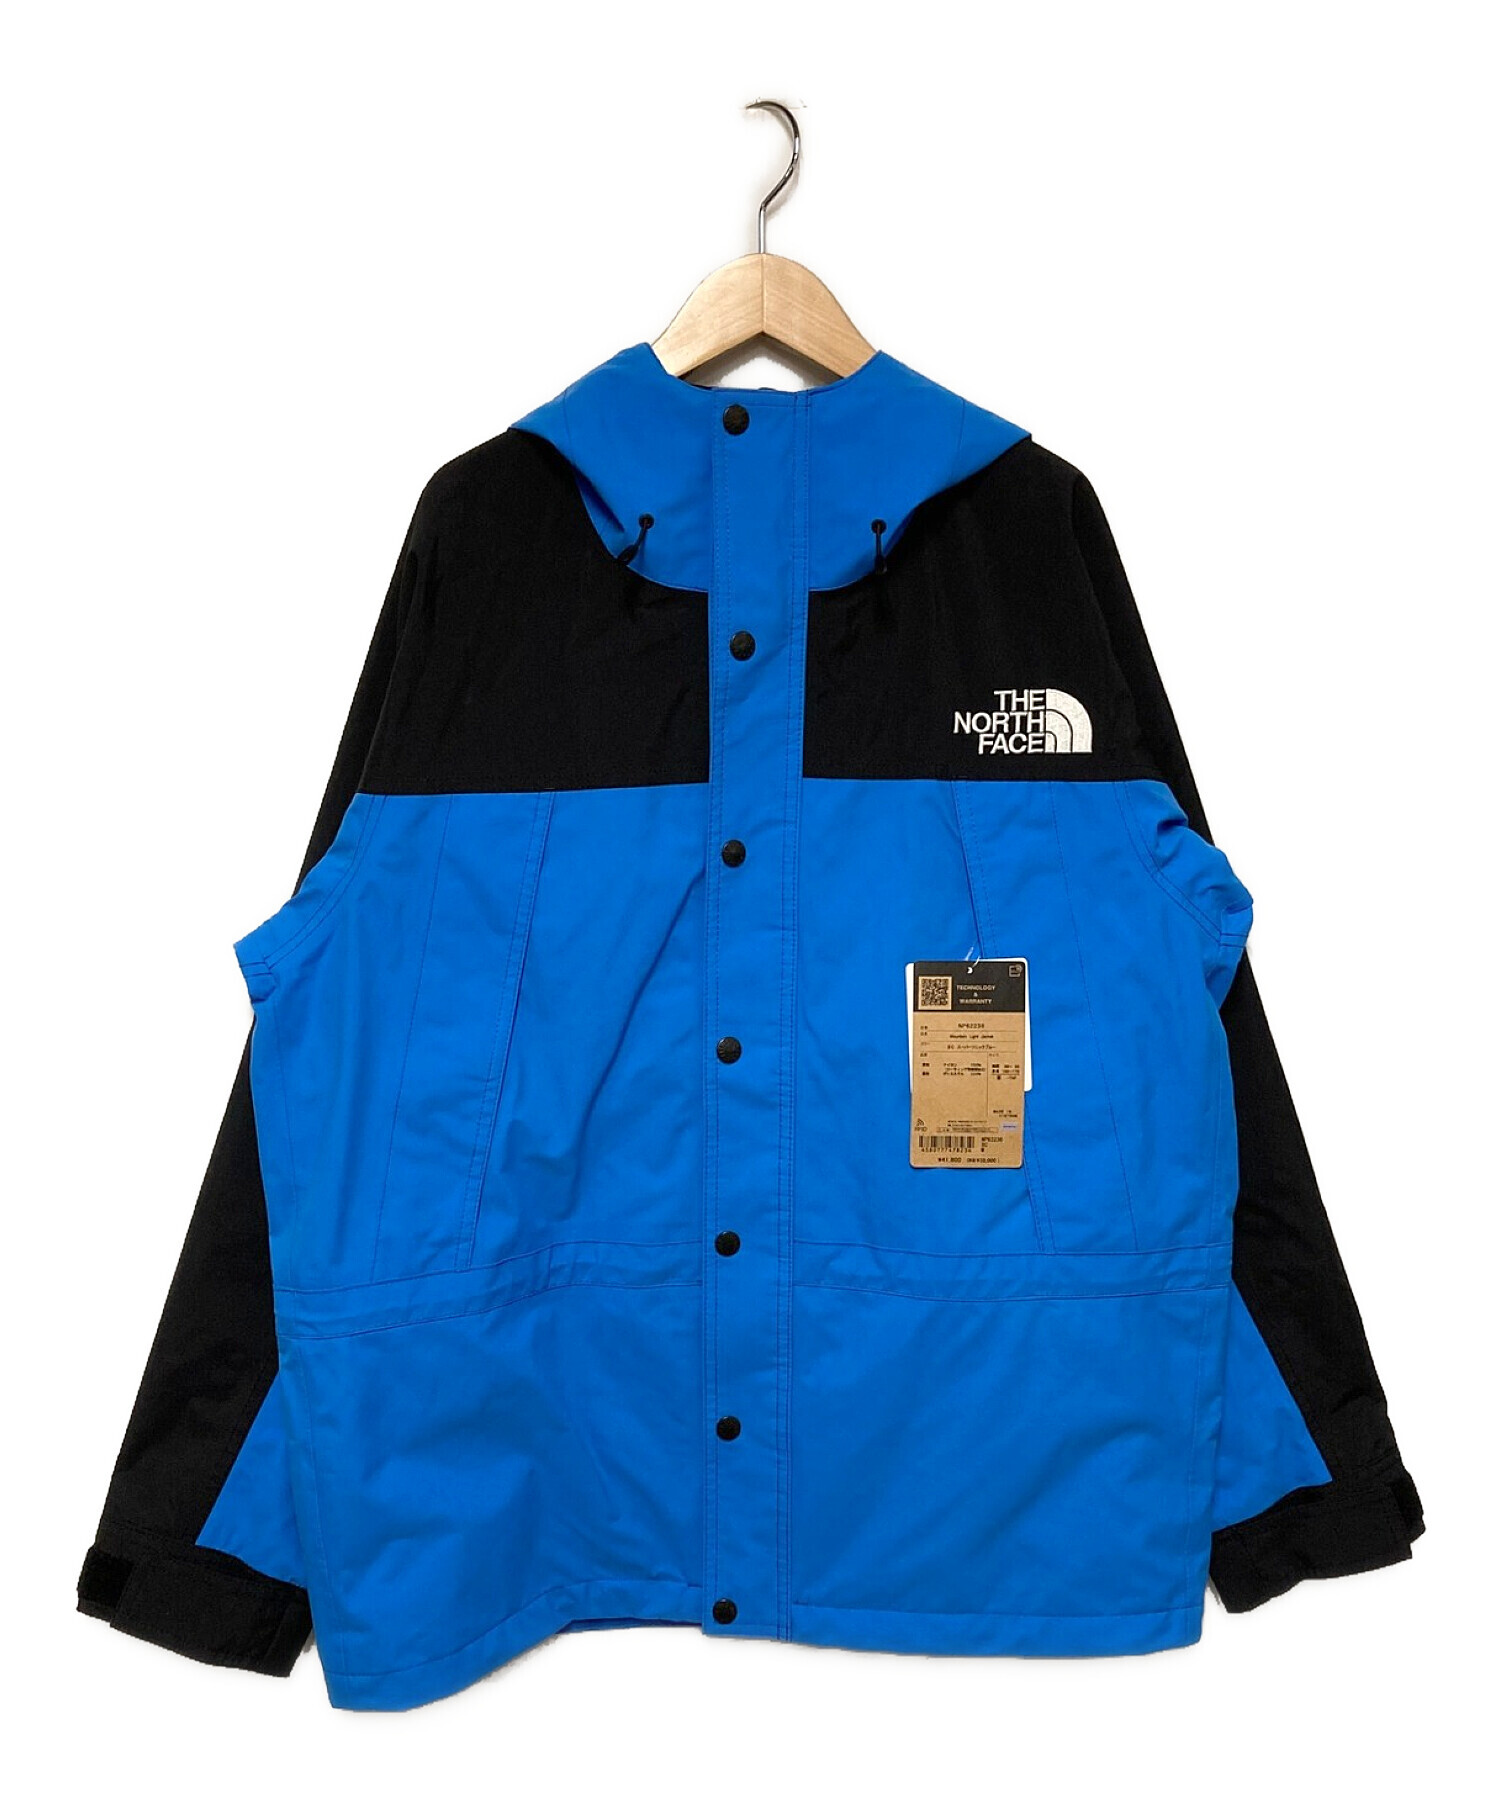 north face mountain jkt M jacket 18awNP61800カラー